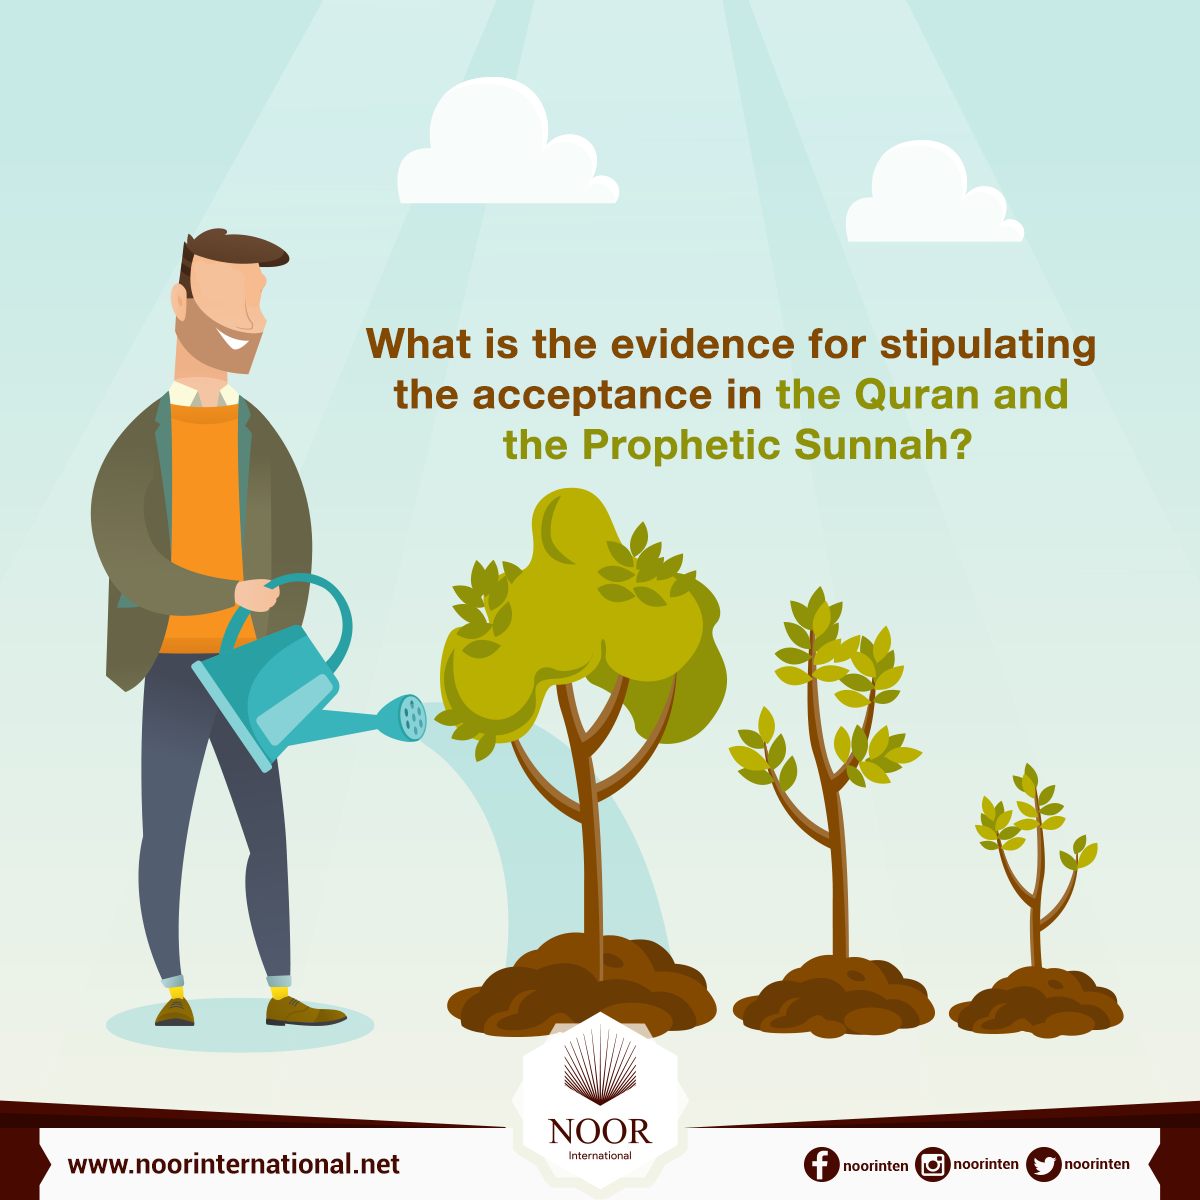 What is the evidence for stipulating the acceptance in the Quran and the Prophetic Sunnah?